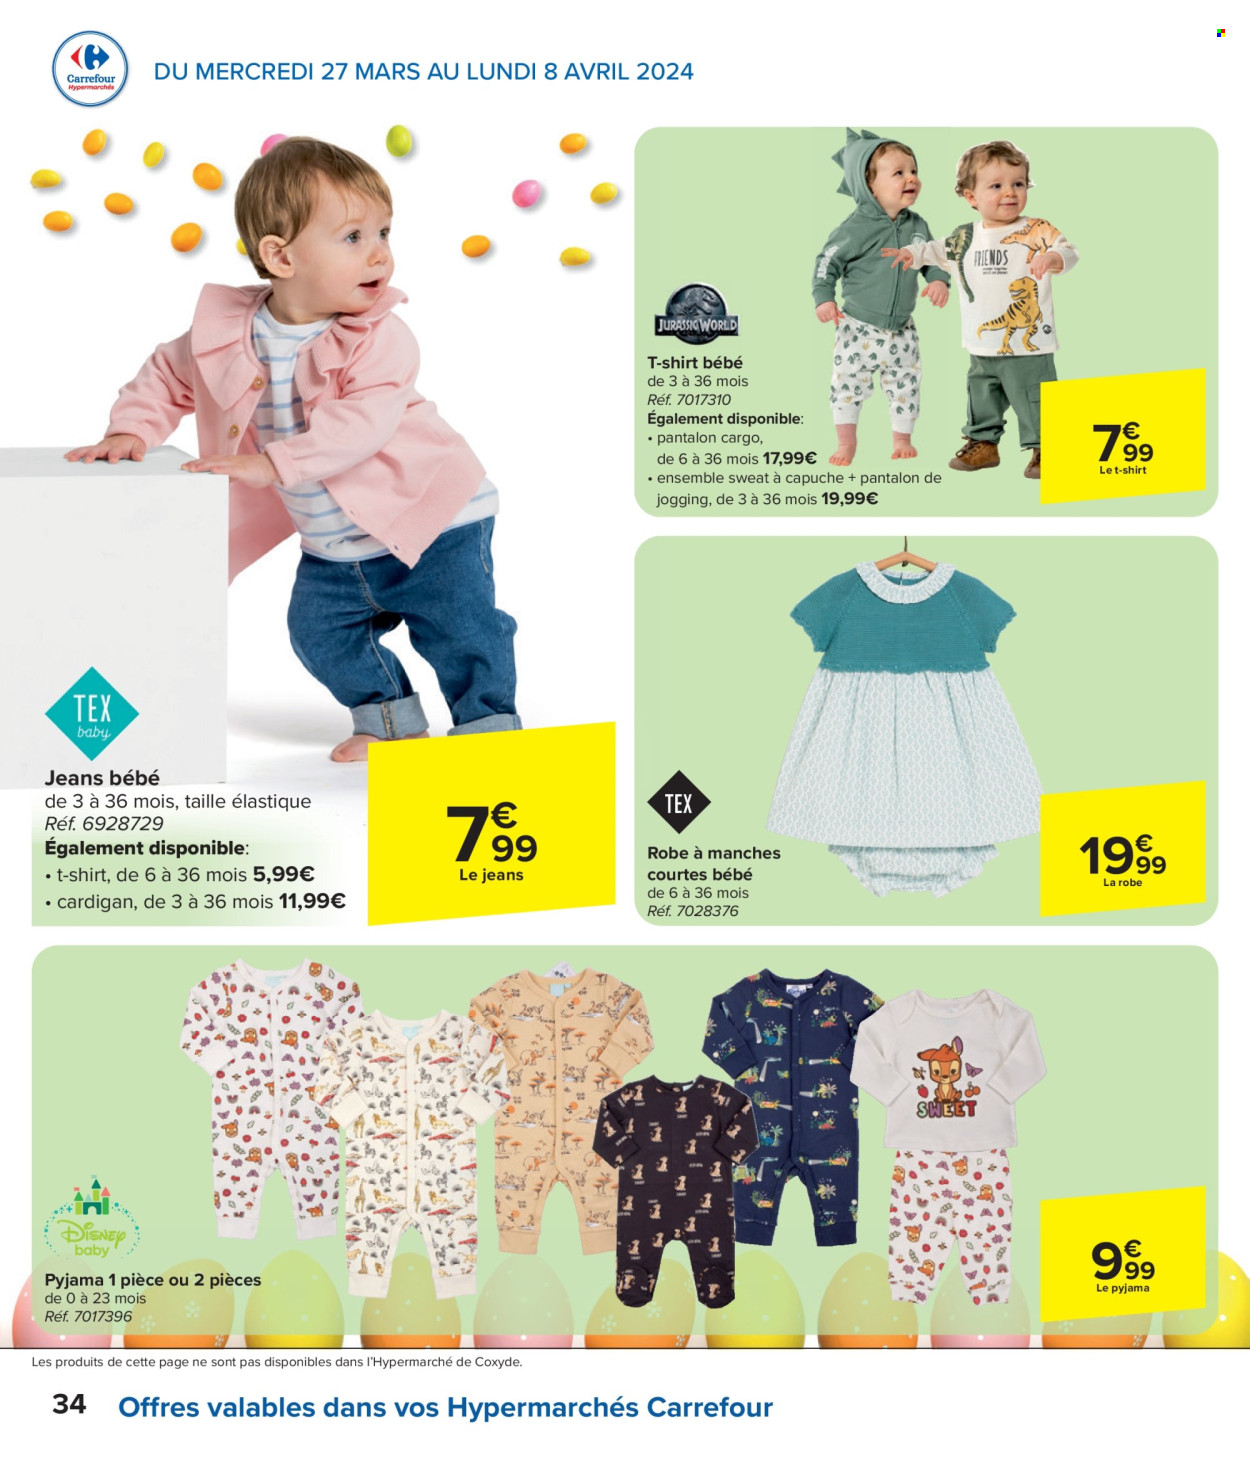 Catalogue Carrefour hypermarkt - 27.3.2024 - 8.4.2024. Page 34.